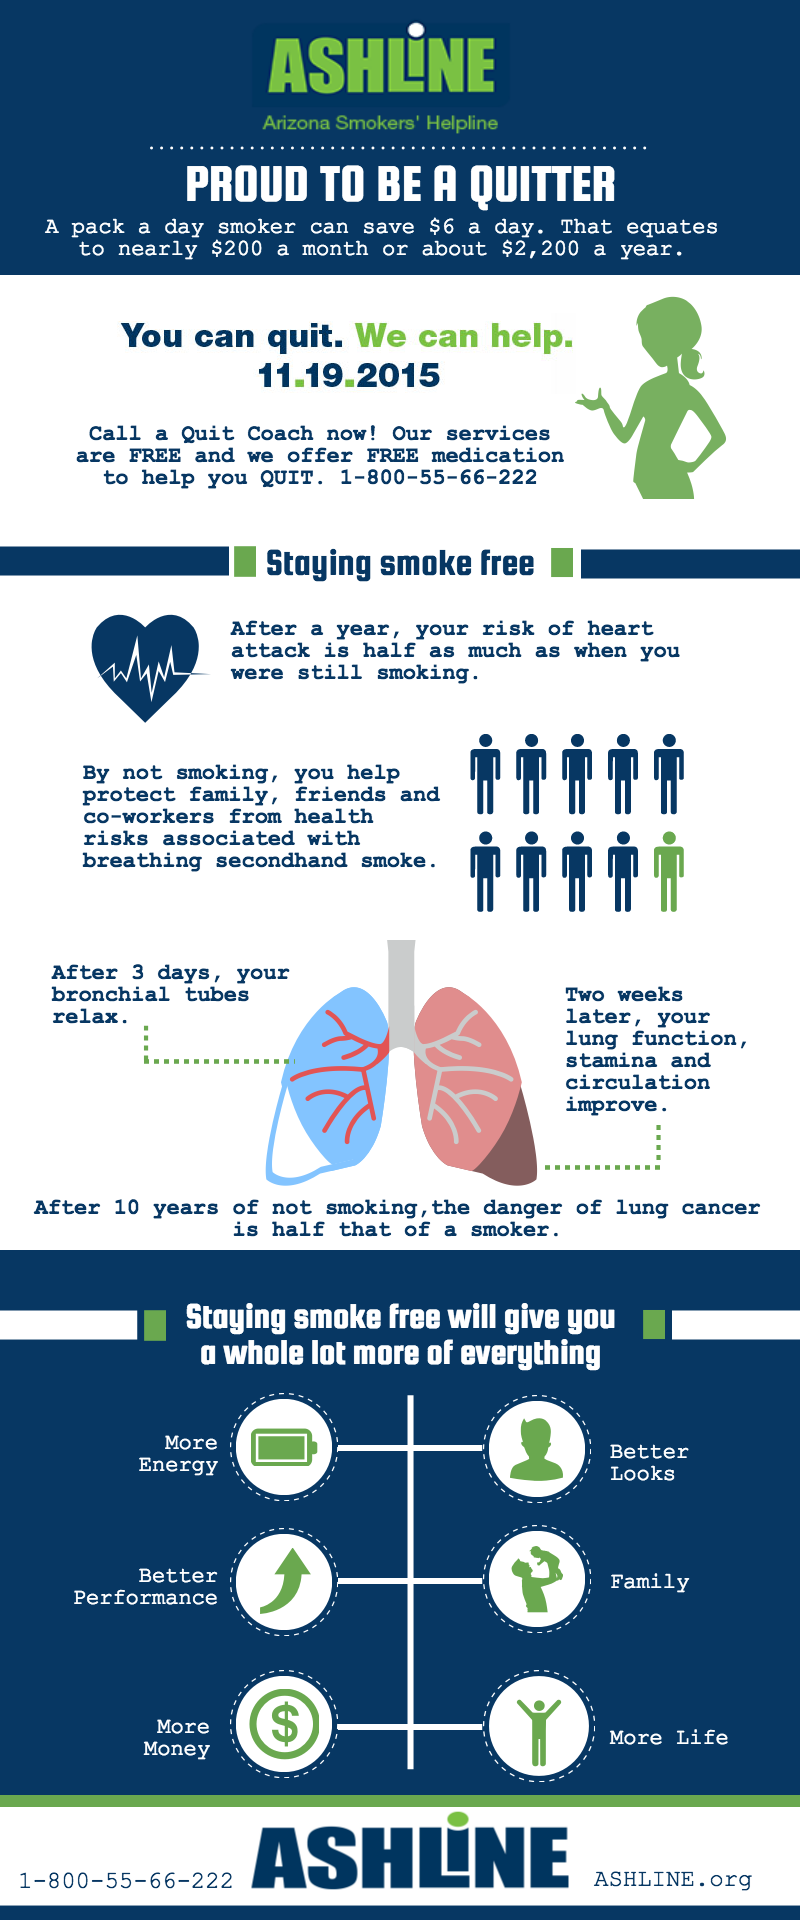 Why Smoking Is Bad For You? Benefits of Quitting Smoking!